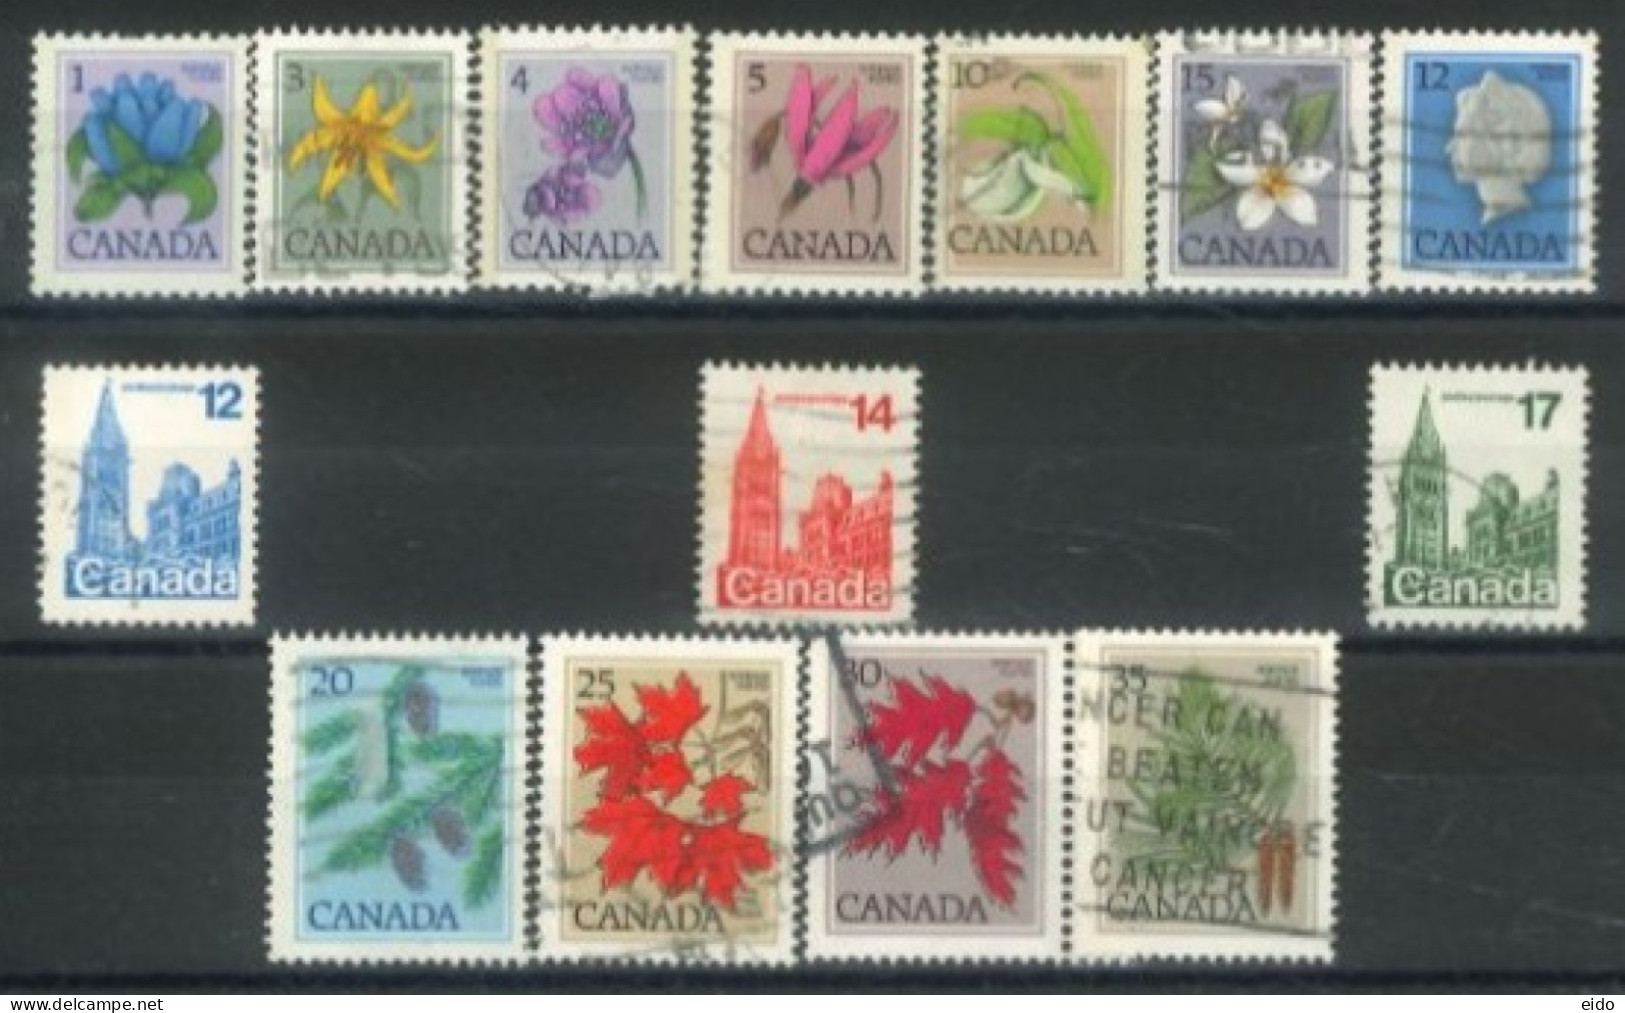 CANADA - 1977, QUEEN ELIZABETH II, HOUSE OF PARLIAMENT, FLOWERS & LEAVES STAMPS SET OF 14, USED. - Used Stamps